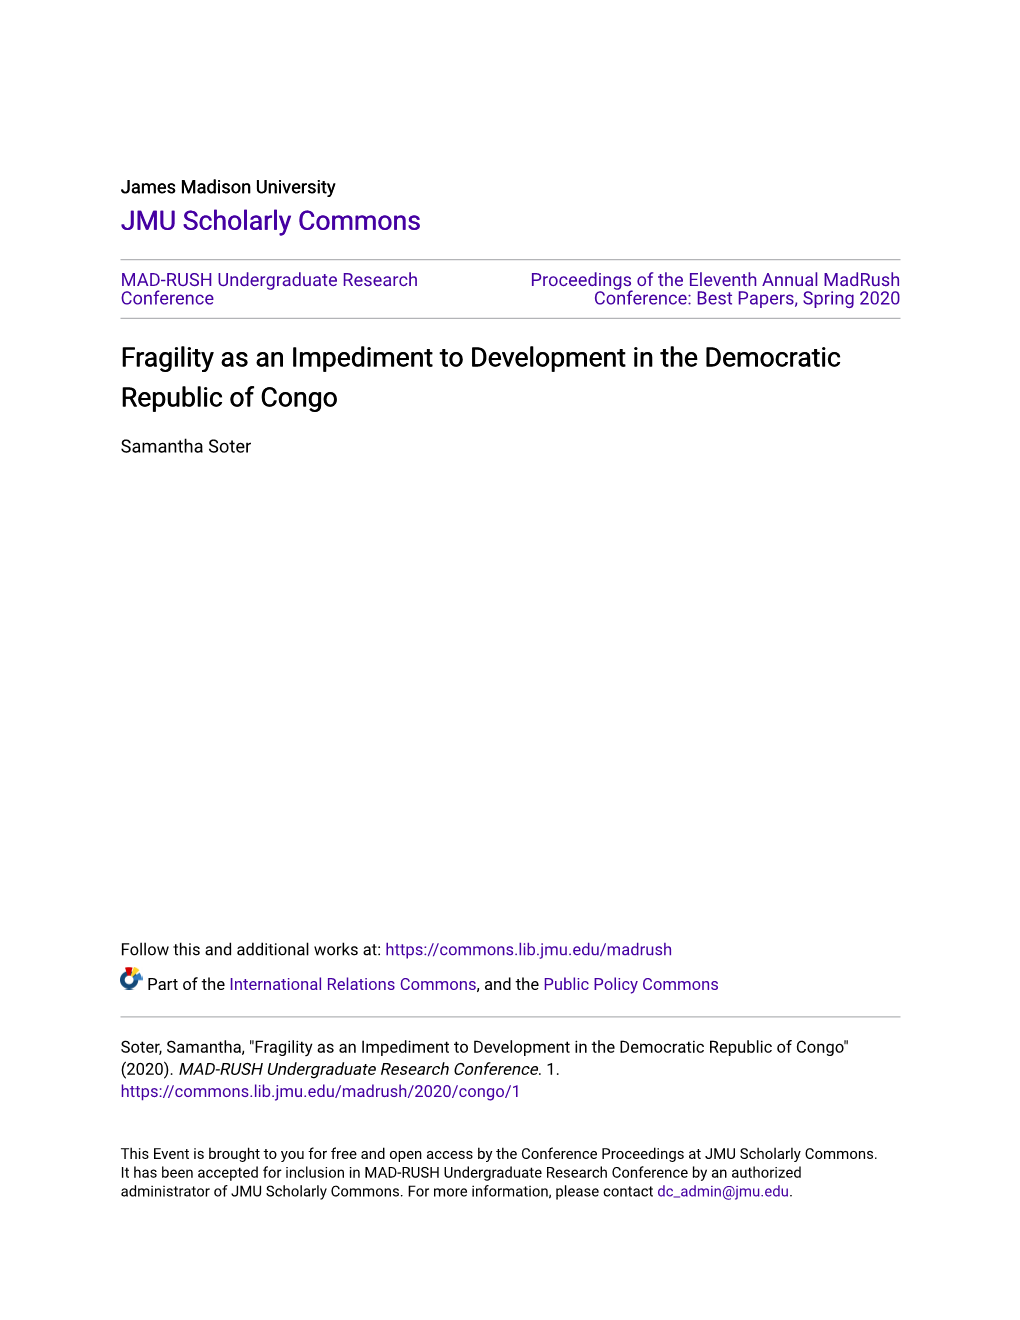 Fragility As an Impediment to Development in the Democratic Republic of Congo